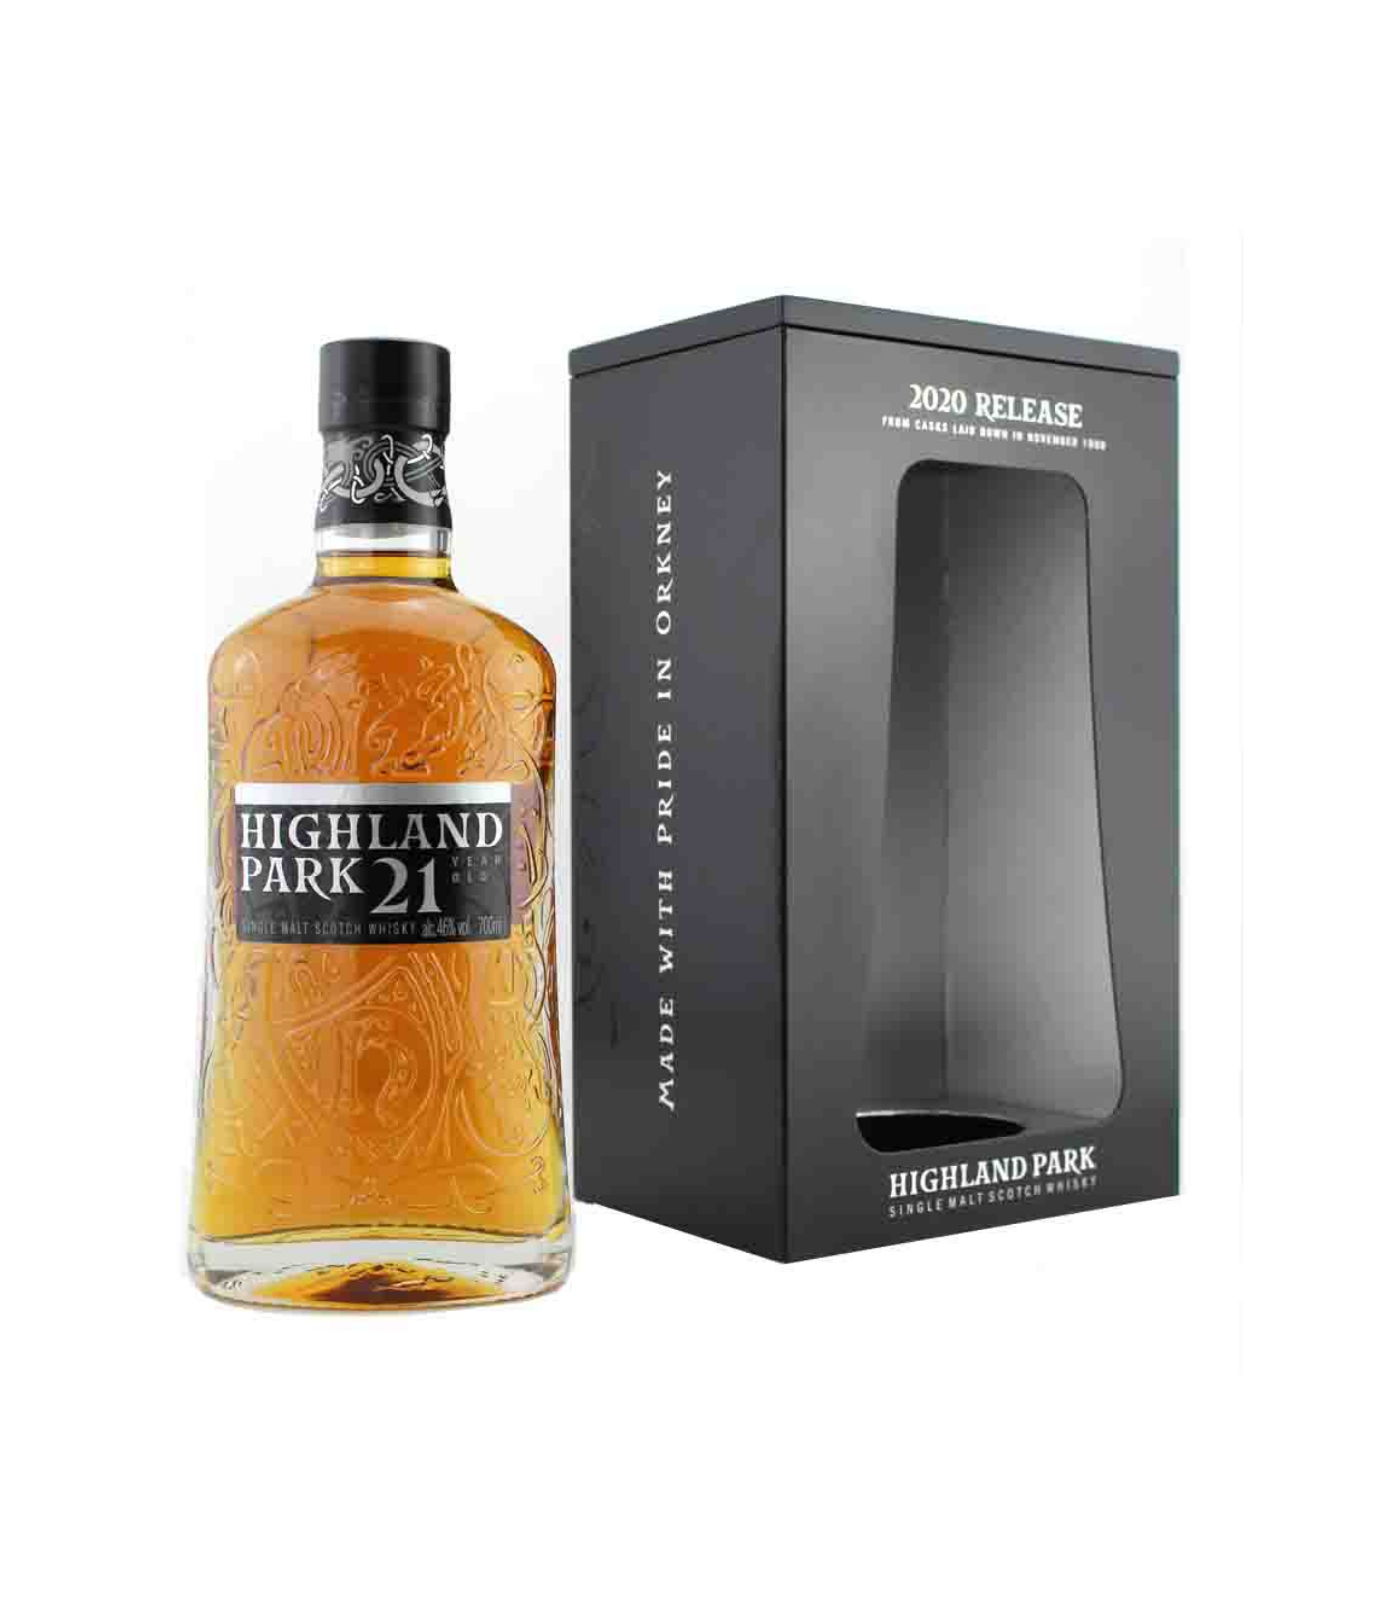 Highland Park 21 Year Old Whisky - 2020 Release (70cl; 46%)